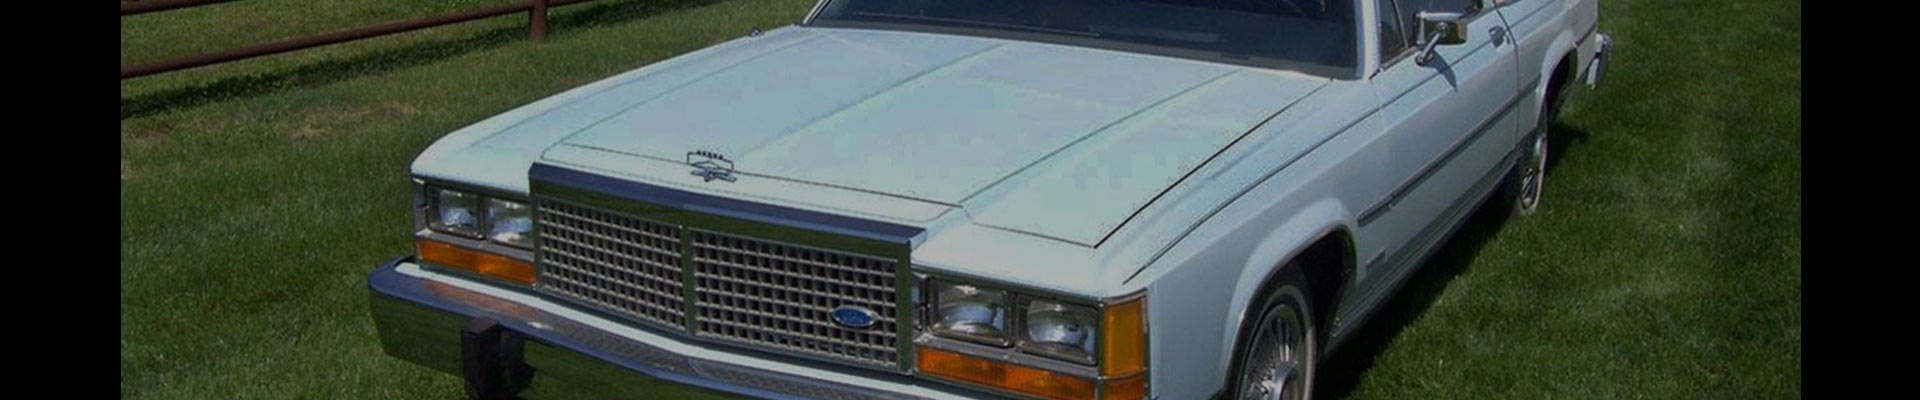 Shop Replacement and OEM Ford LTD Crown Victoria Parts with Discounted Price on the Net